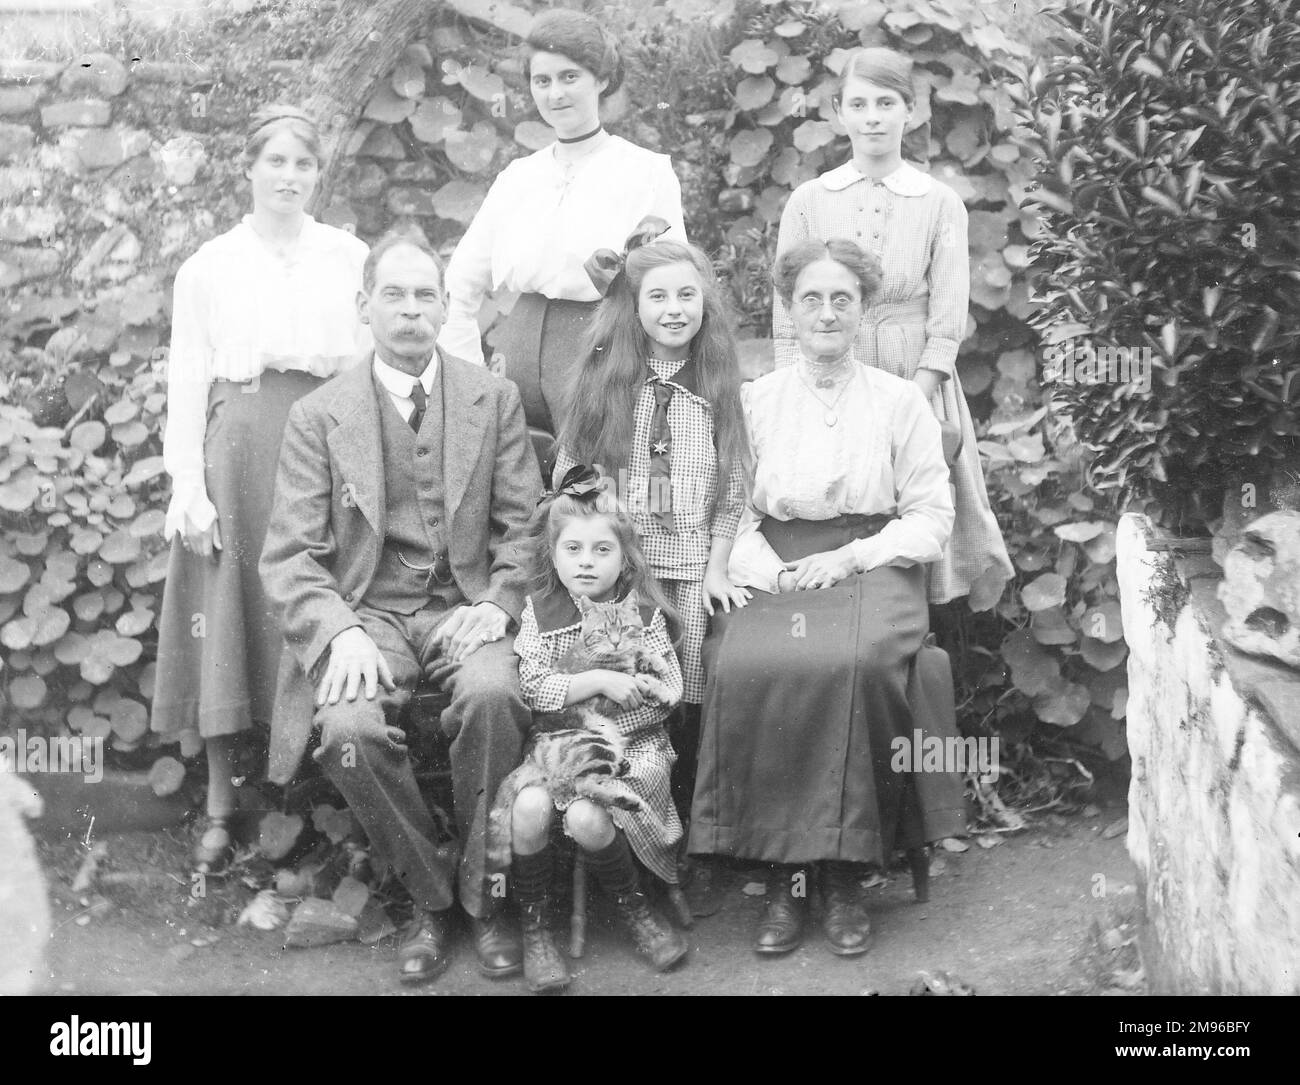 A middle class Edwardian family  pose for a group photograph in a garden, probably in the Mid Wales area.  The little girl in the middle is holding a tabby cat in her arms. Stock Photo